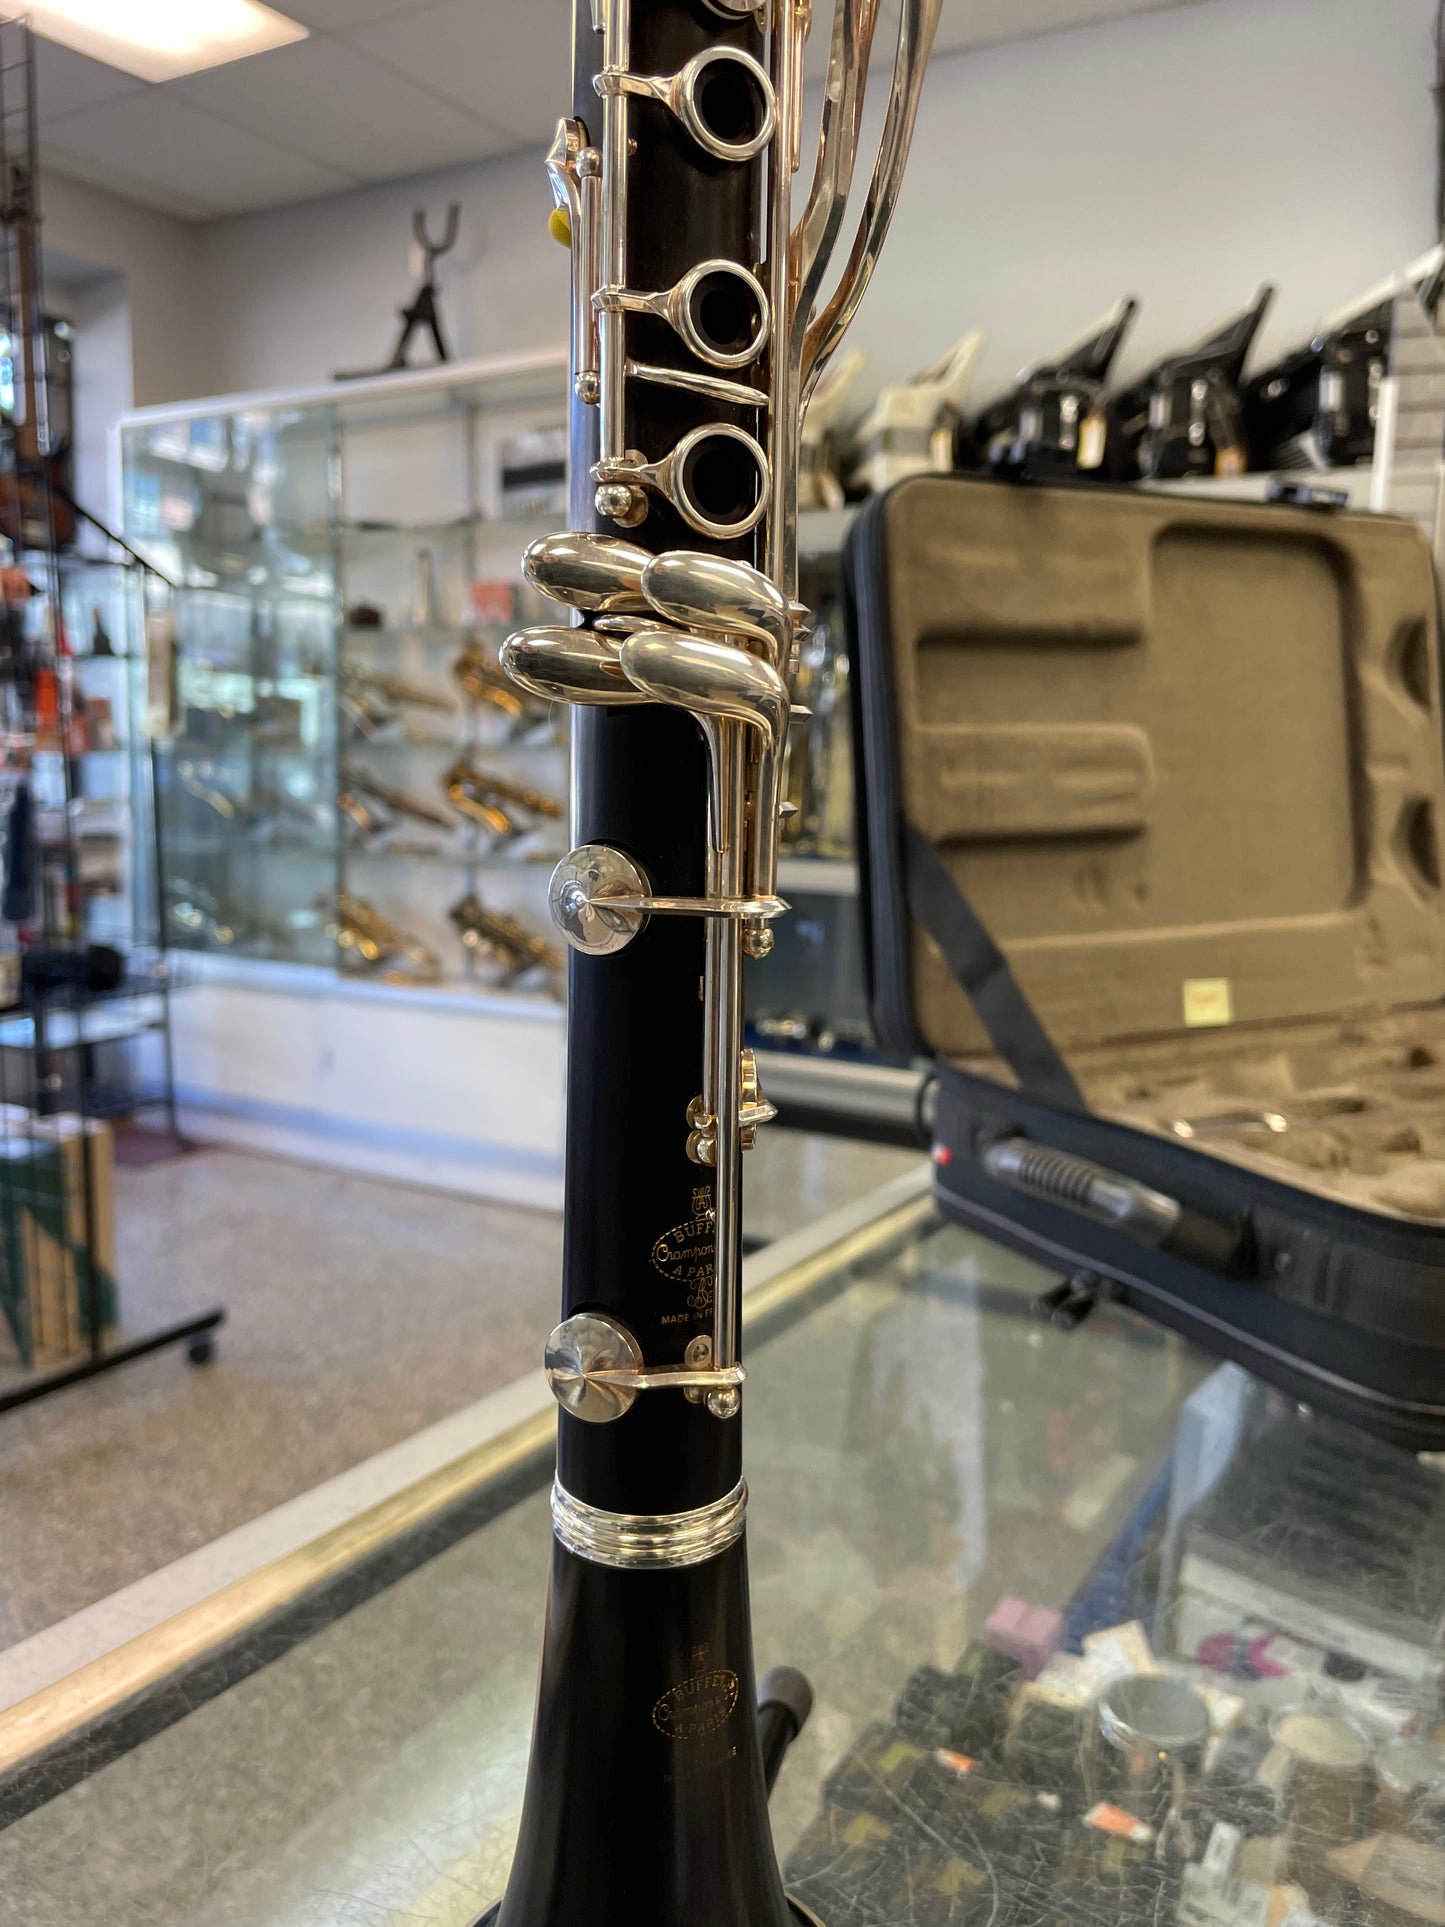 Pre-Owned Buffet Festival A Clarinet